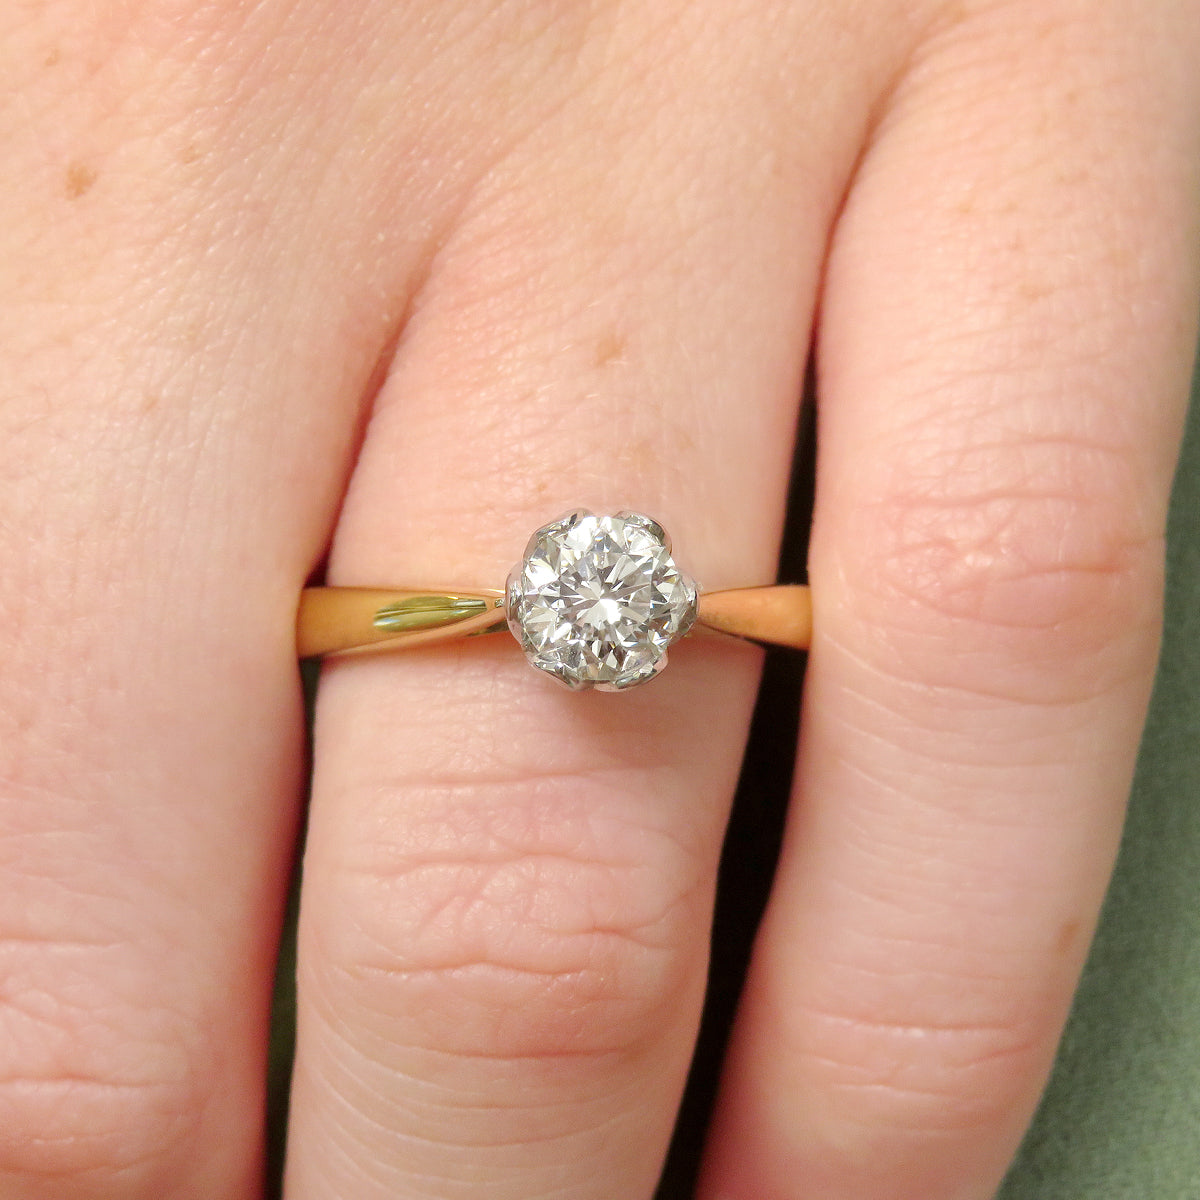 Stunning 0.73ct lab grown diamond solitaire ring by greenhouse diamonds